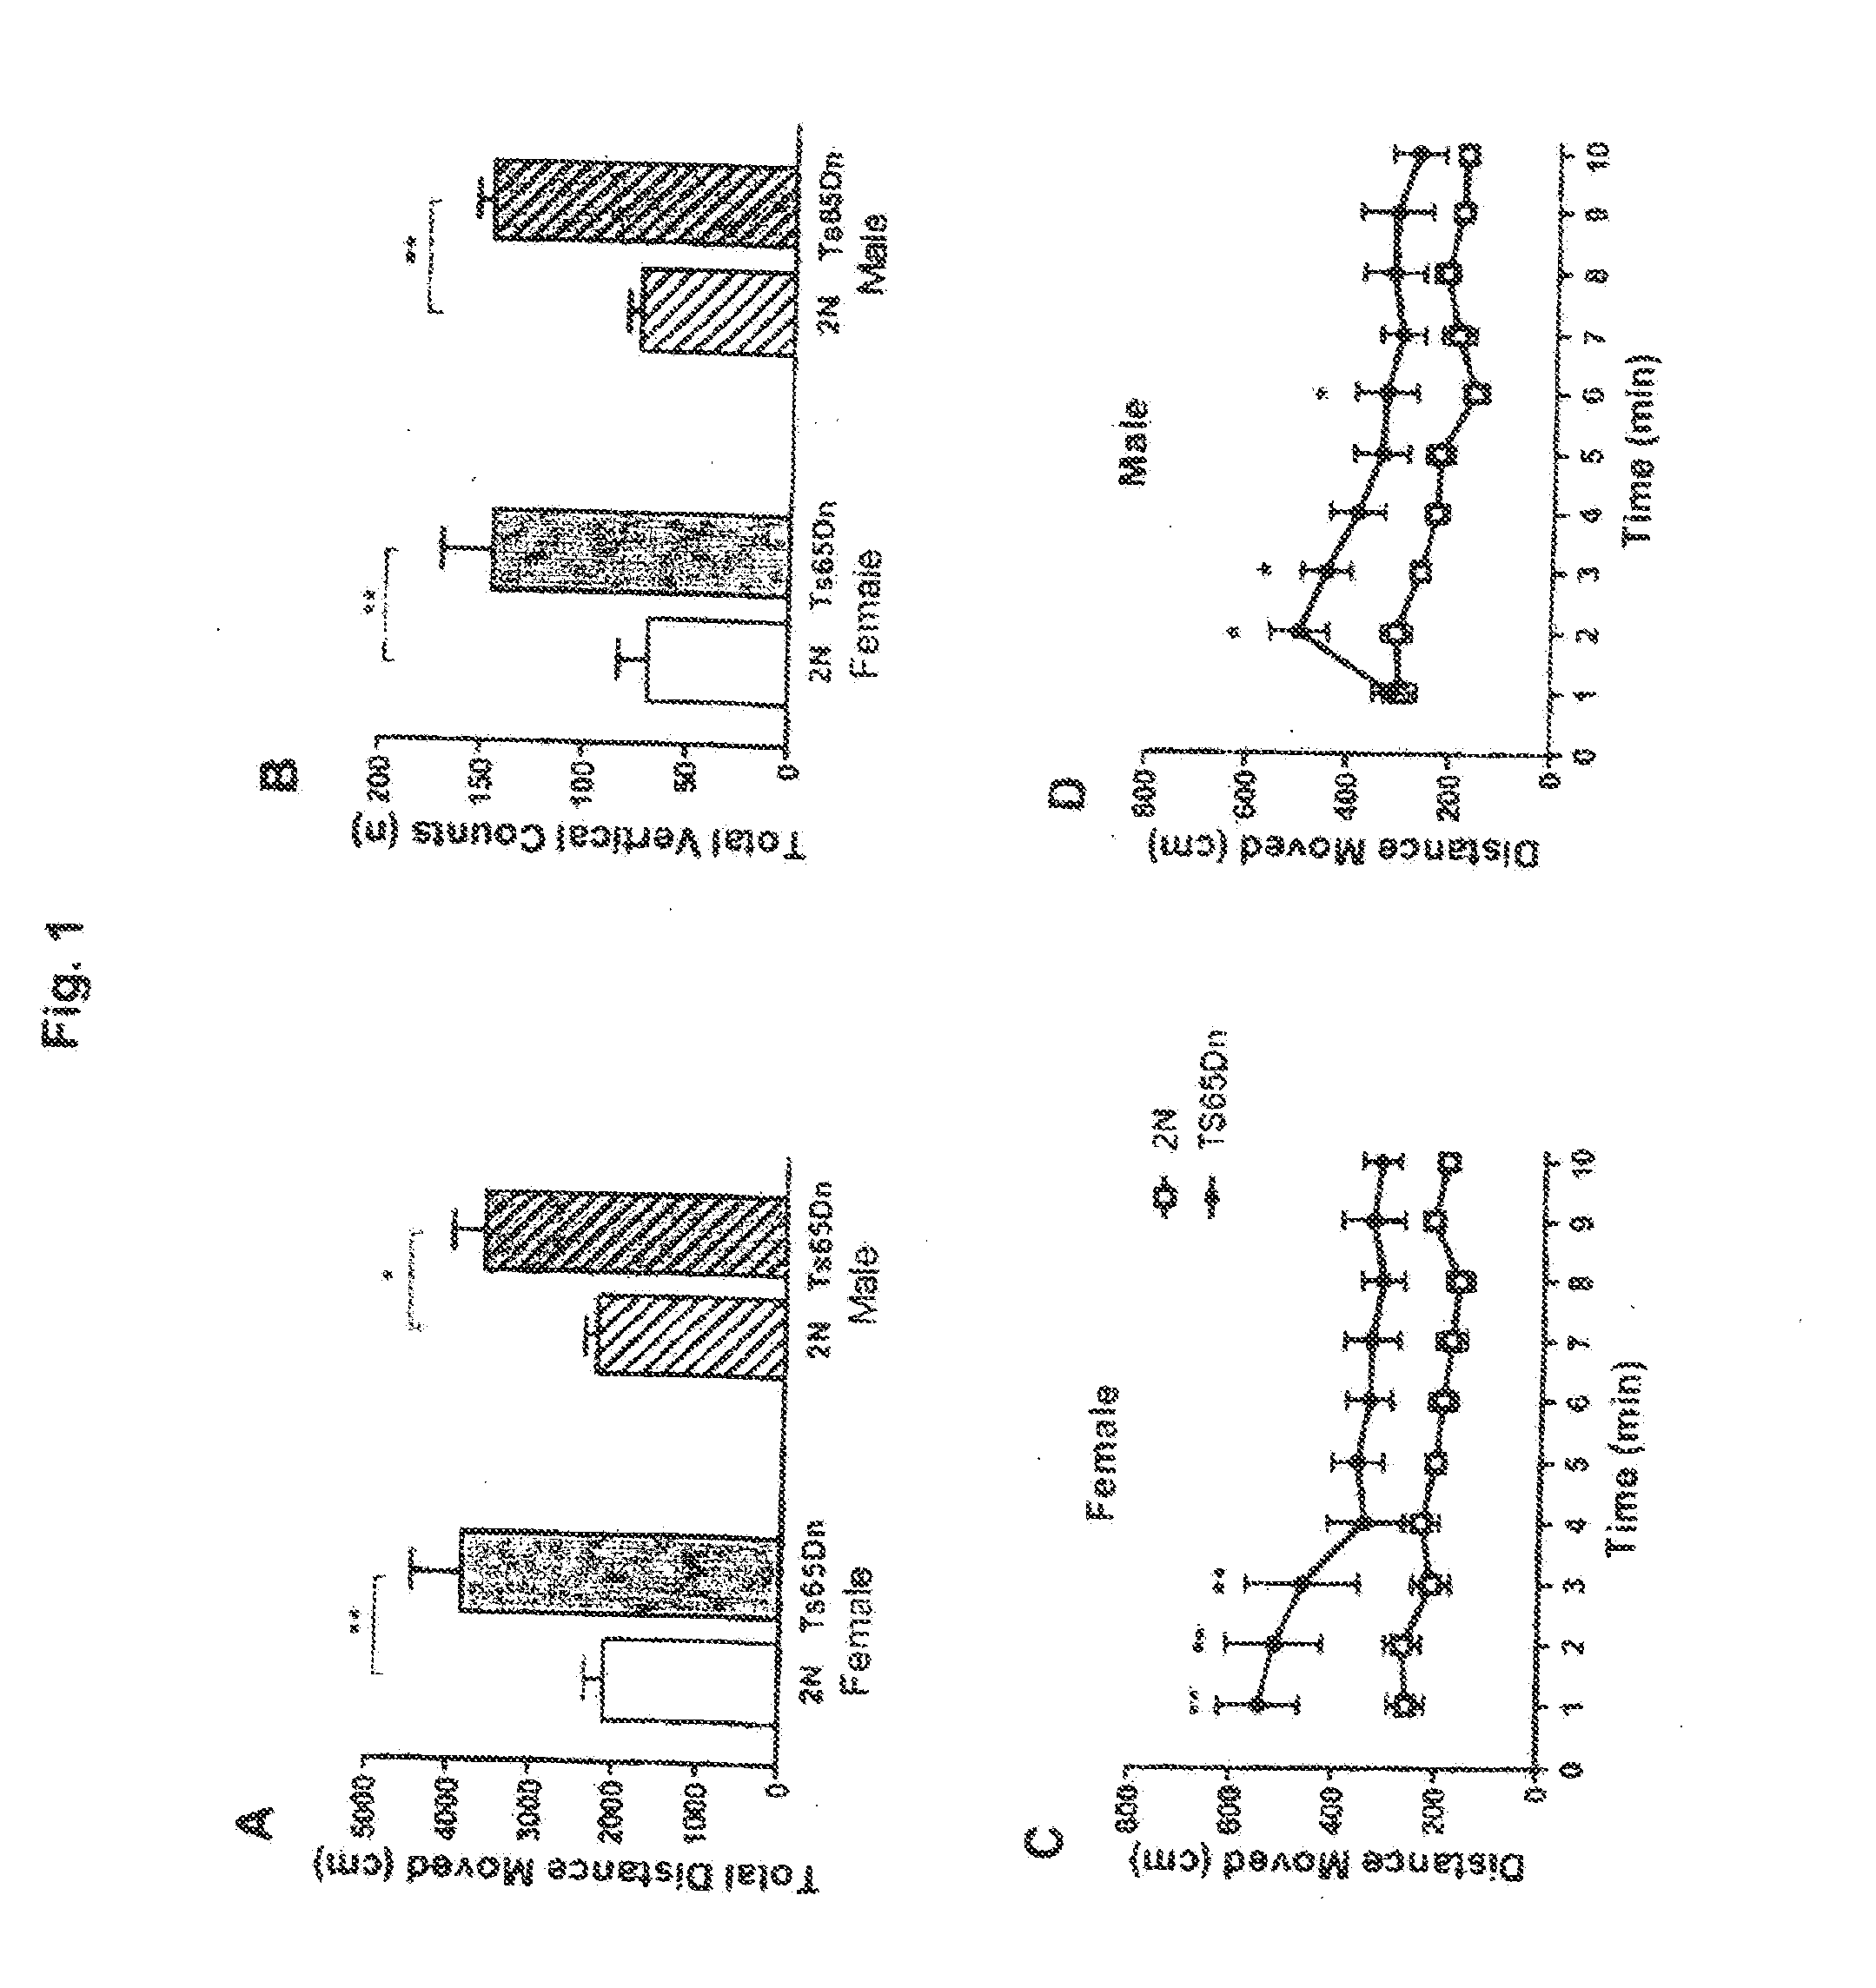 Method for enhancing learning and memory impaired by neurodegenerative disorders and compounds and compositions for effecting the same